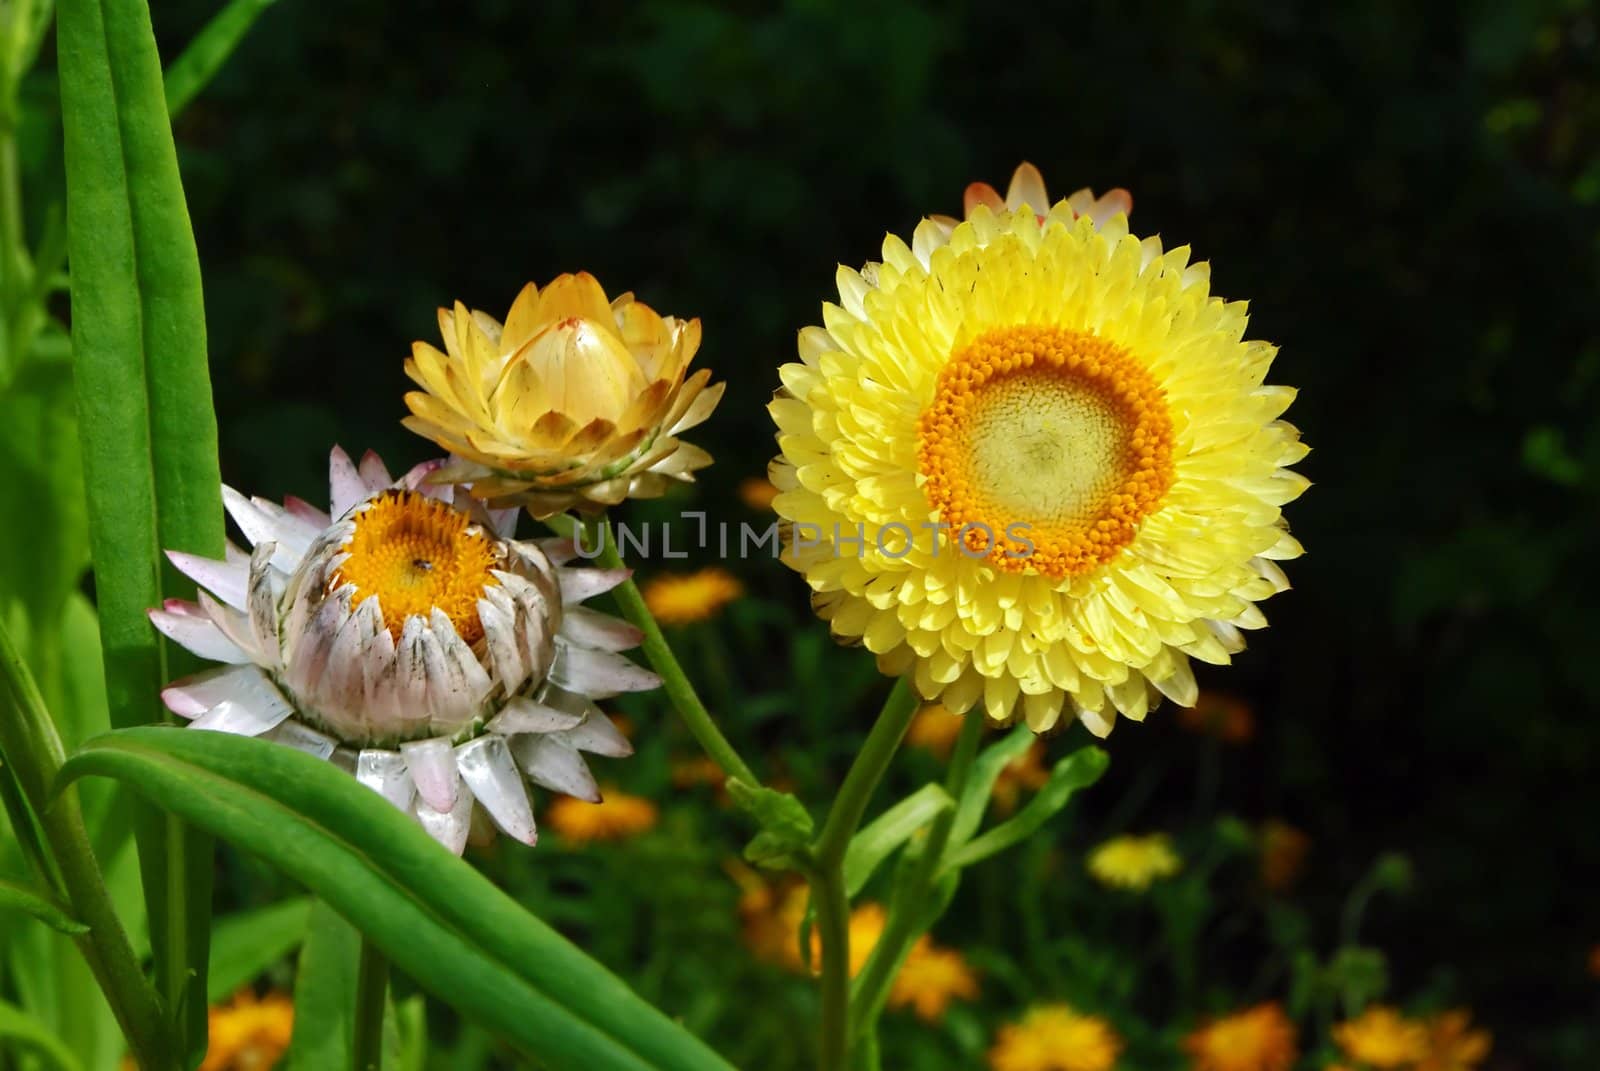 Helichrysum flowers suitable for drying by Vitamin